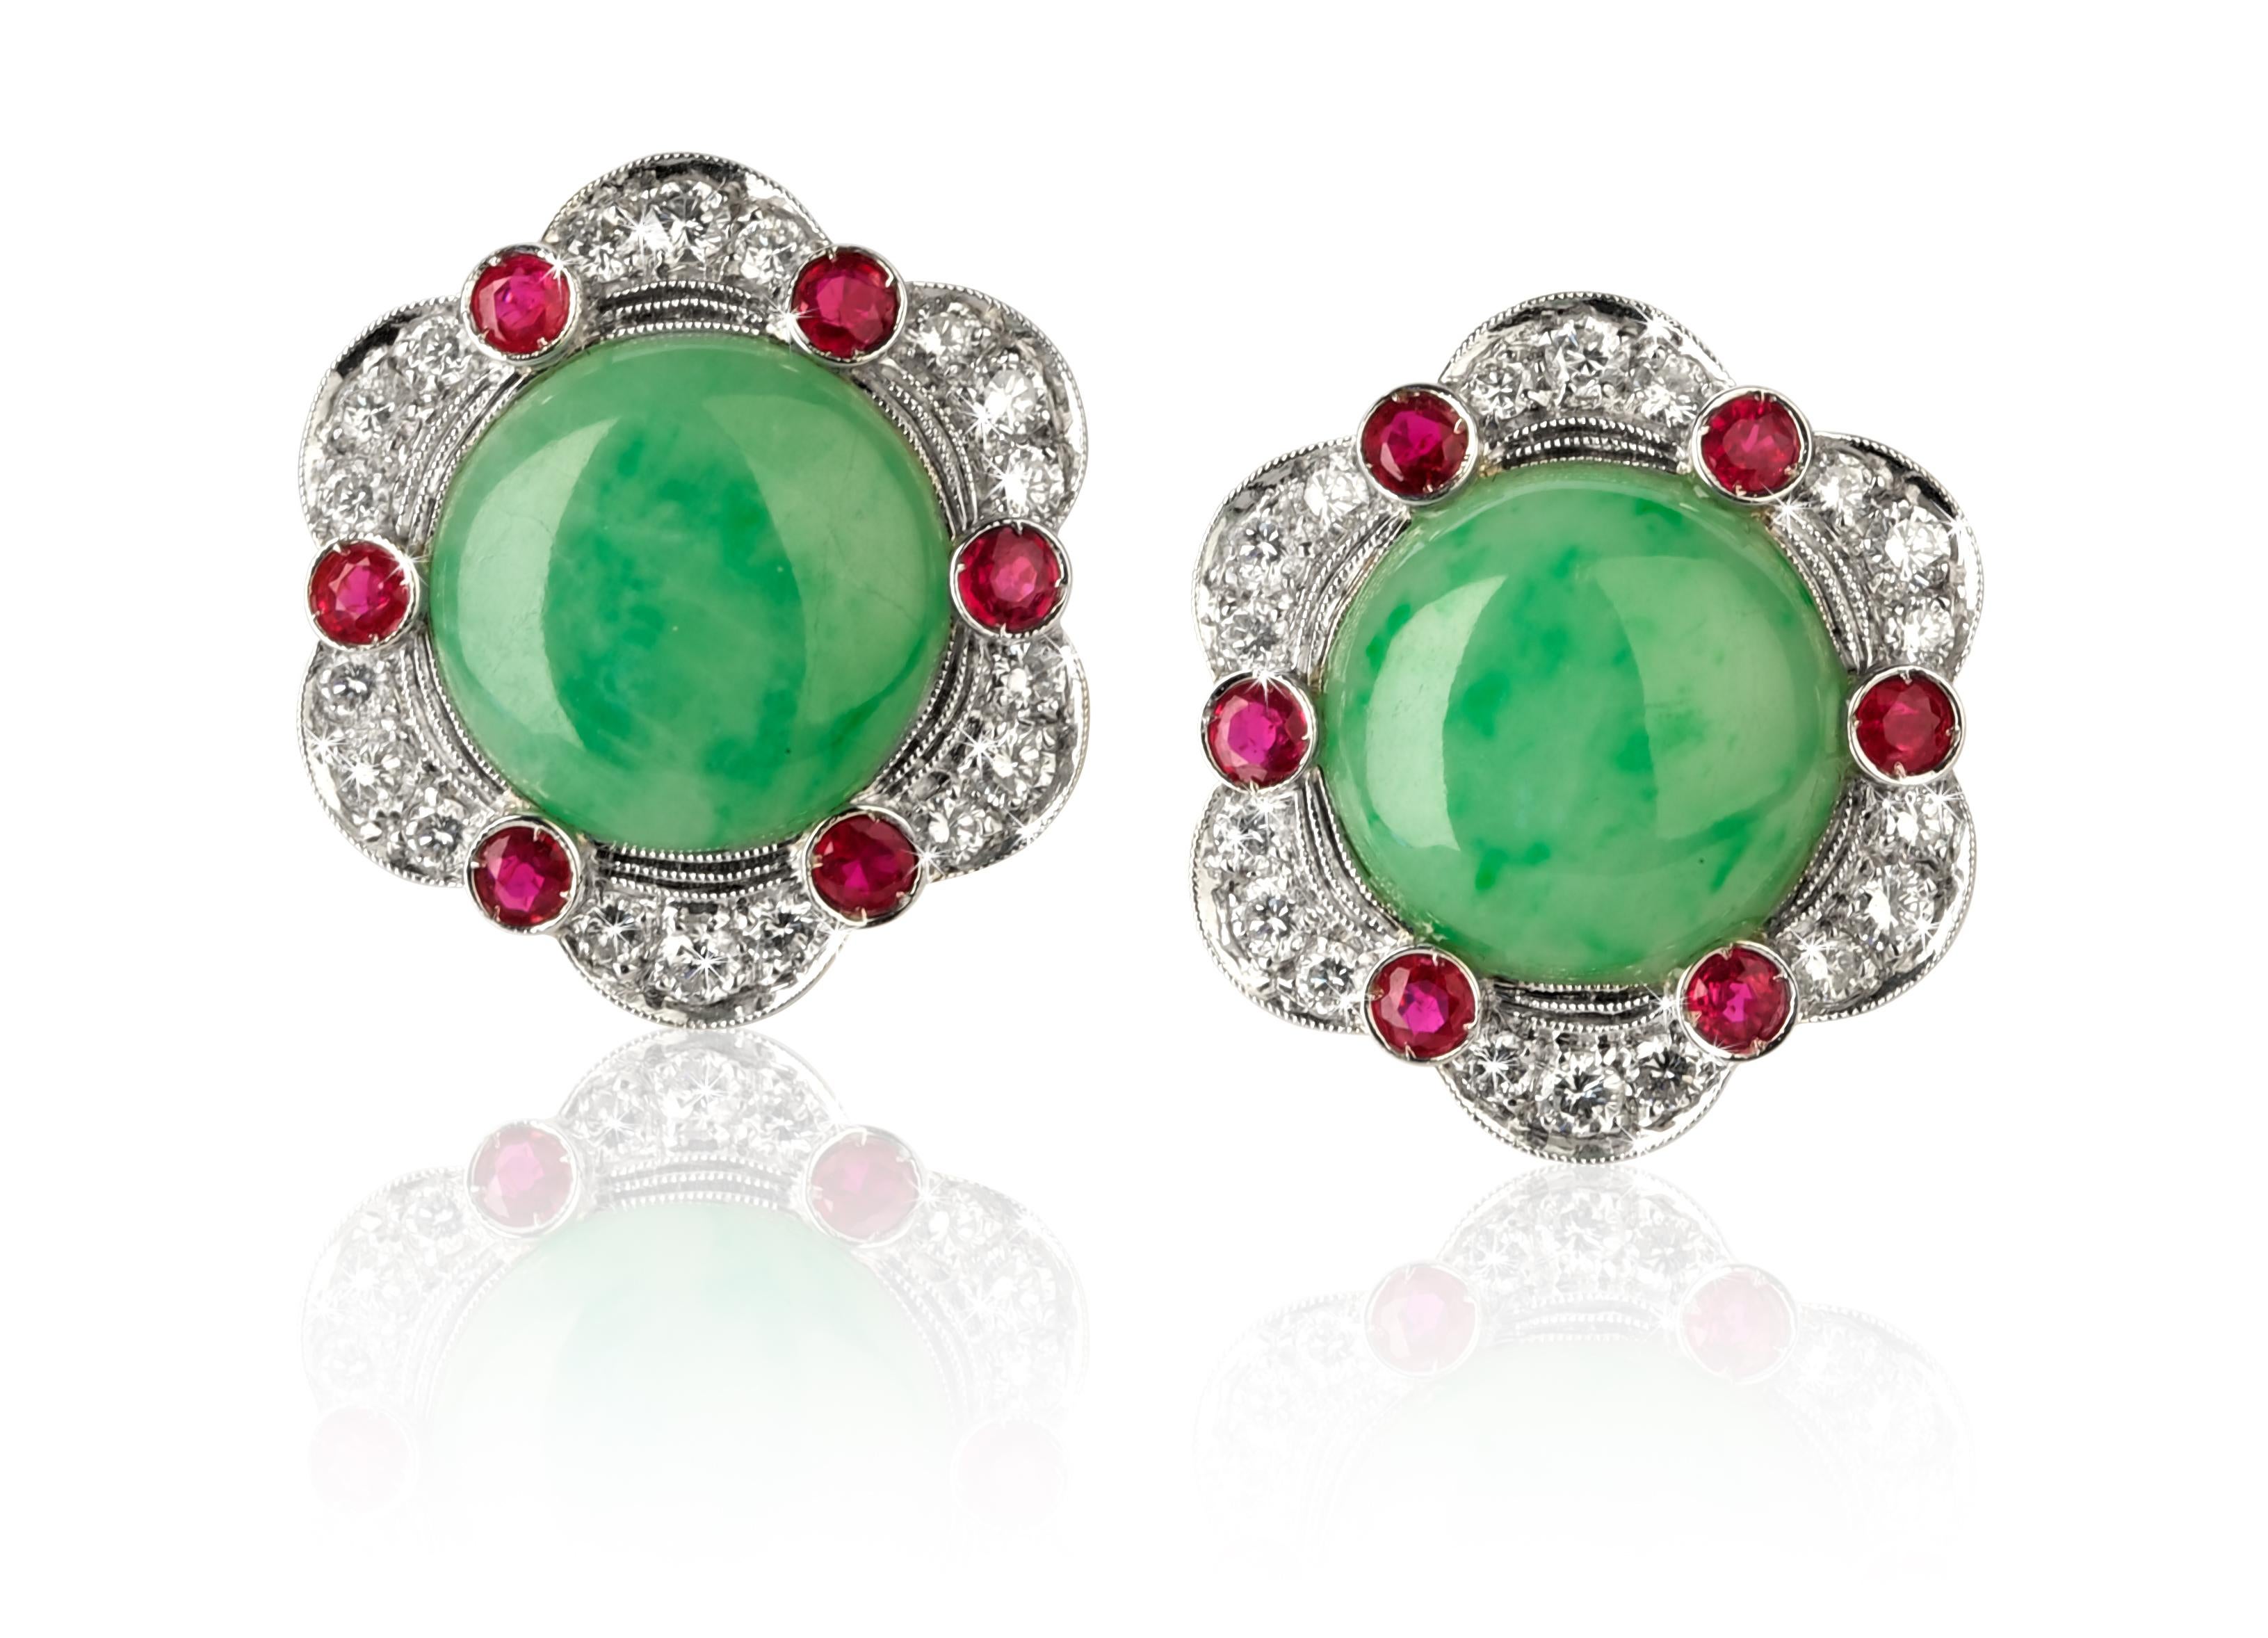 Vintage Jade Earrings From ANGELETTI PRIVATE COLLECTION White gold 18kt with Diamonds ct. 1.55 and Ruby ct. 1.42.
The Earrings were manufactured in ‘60s in Italy by expert Goldsmith from Rome.
The Jade is A quality Cabochon. The Round Rubies ct.